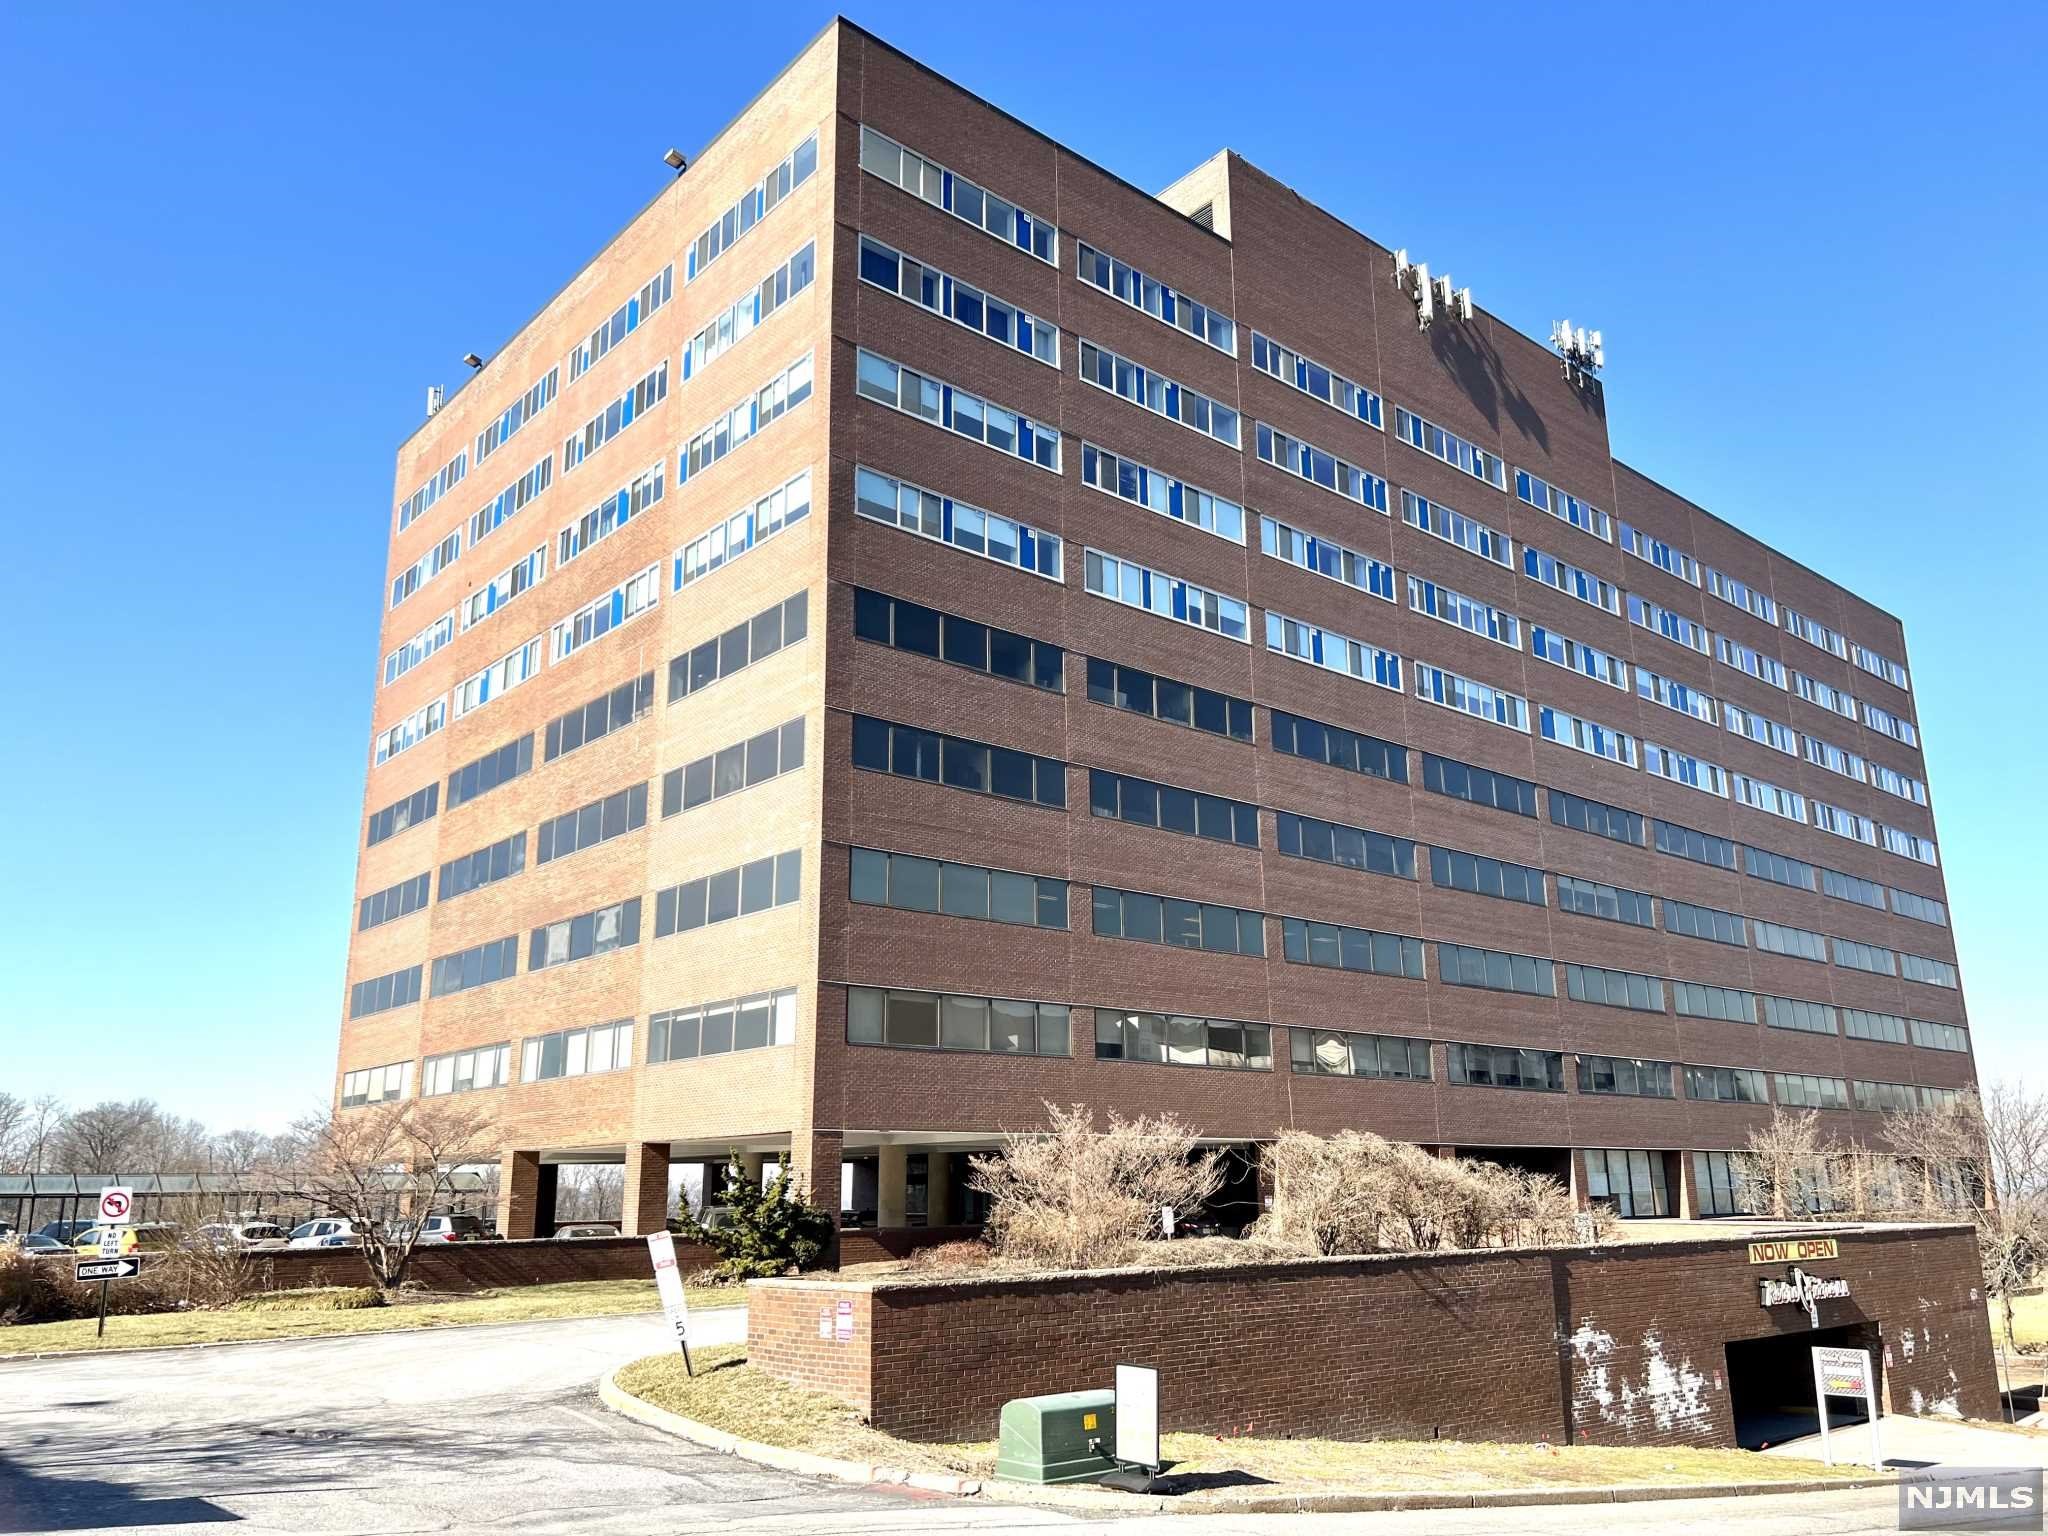 MLS Number 23003179 - 2 bed,2 bath, Rentals-Residential Property for $3,300  - 2 Executive Drive, Unit 720, Fort Lee, NJ - New Jersey Multiple Listing  Service